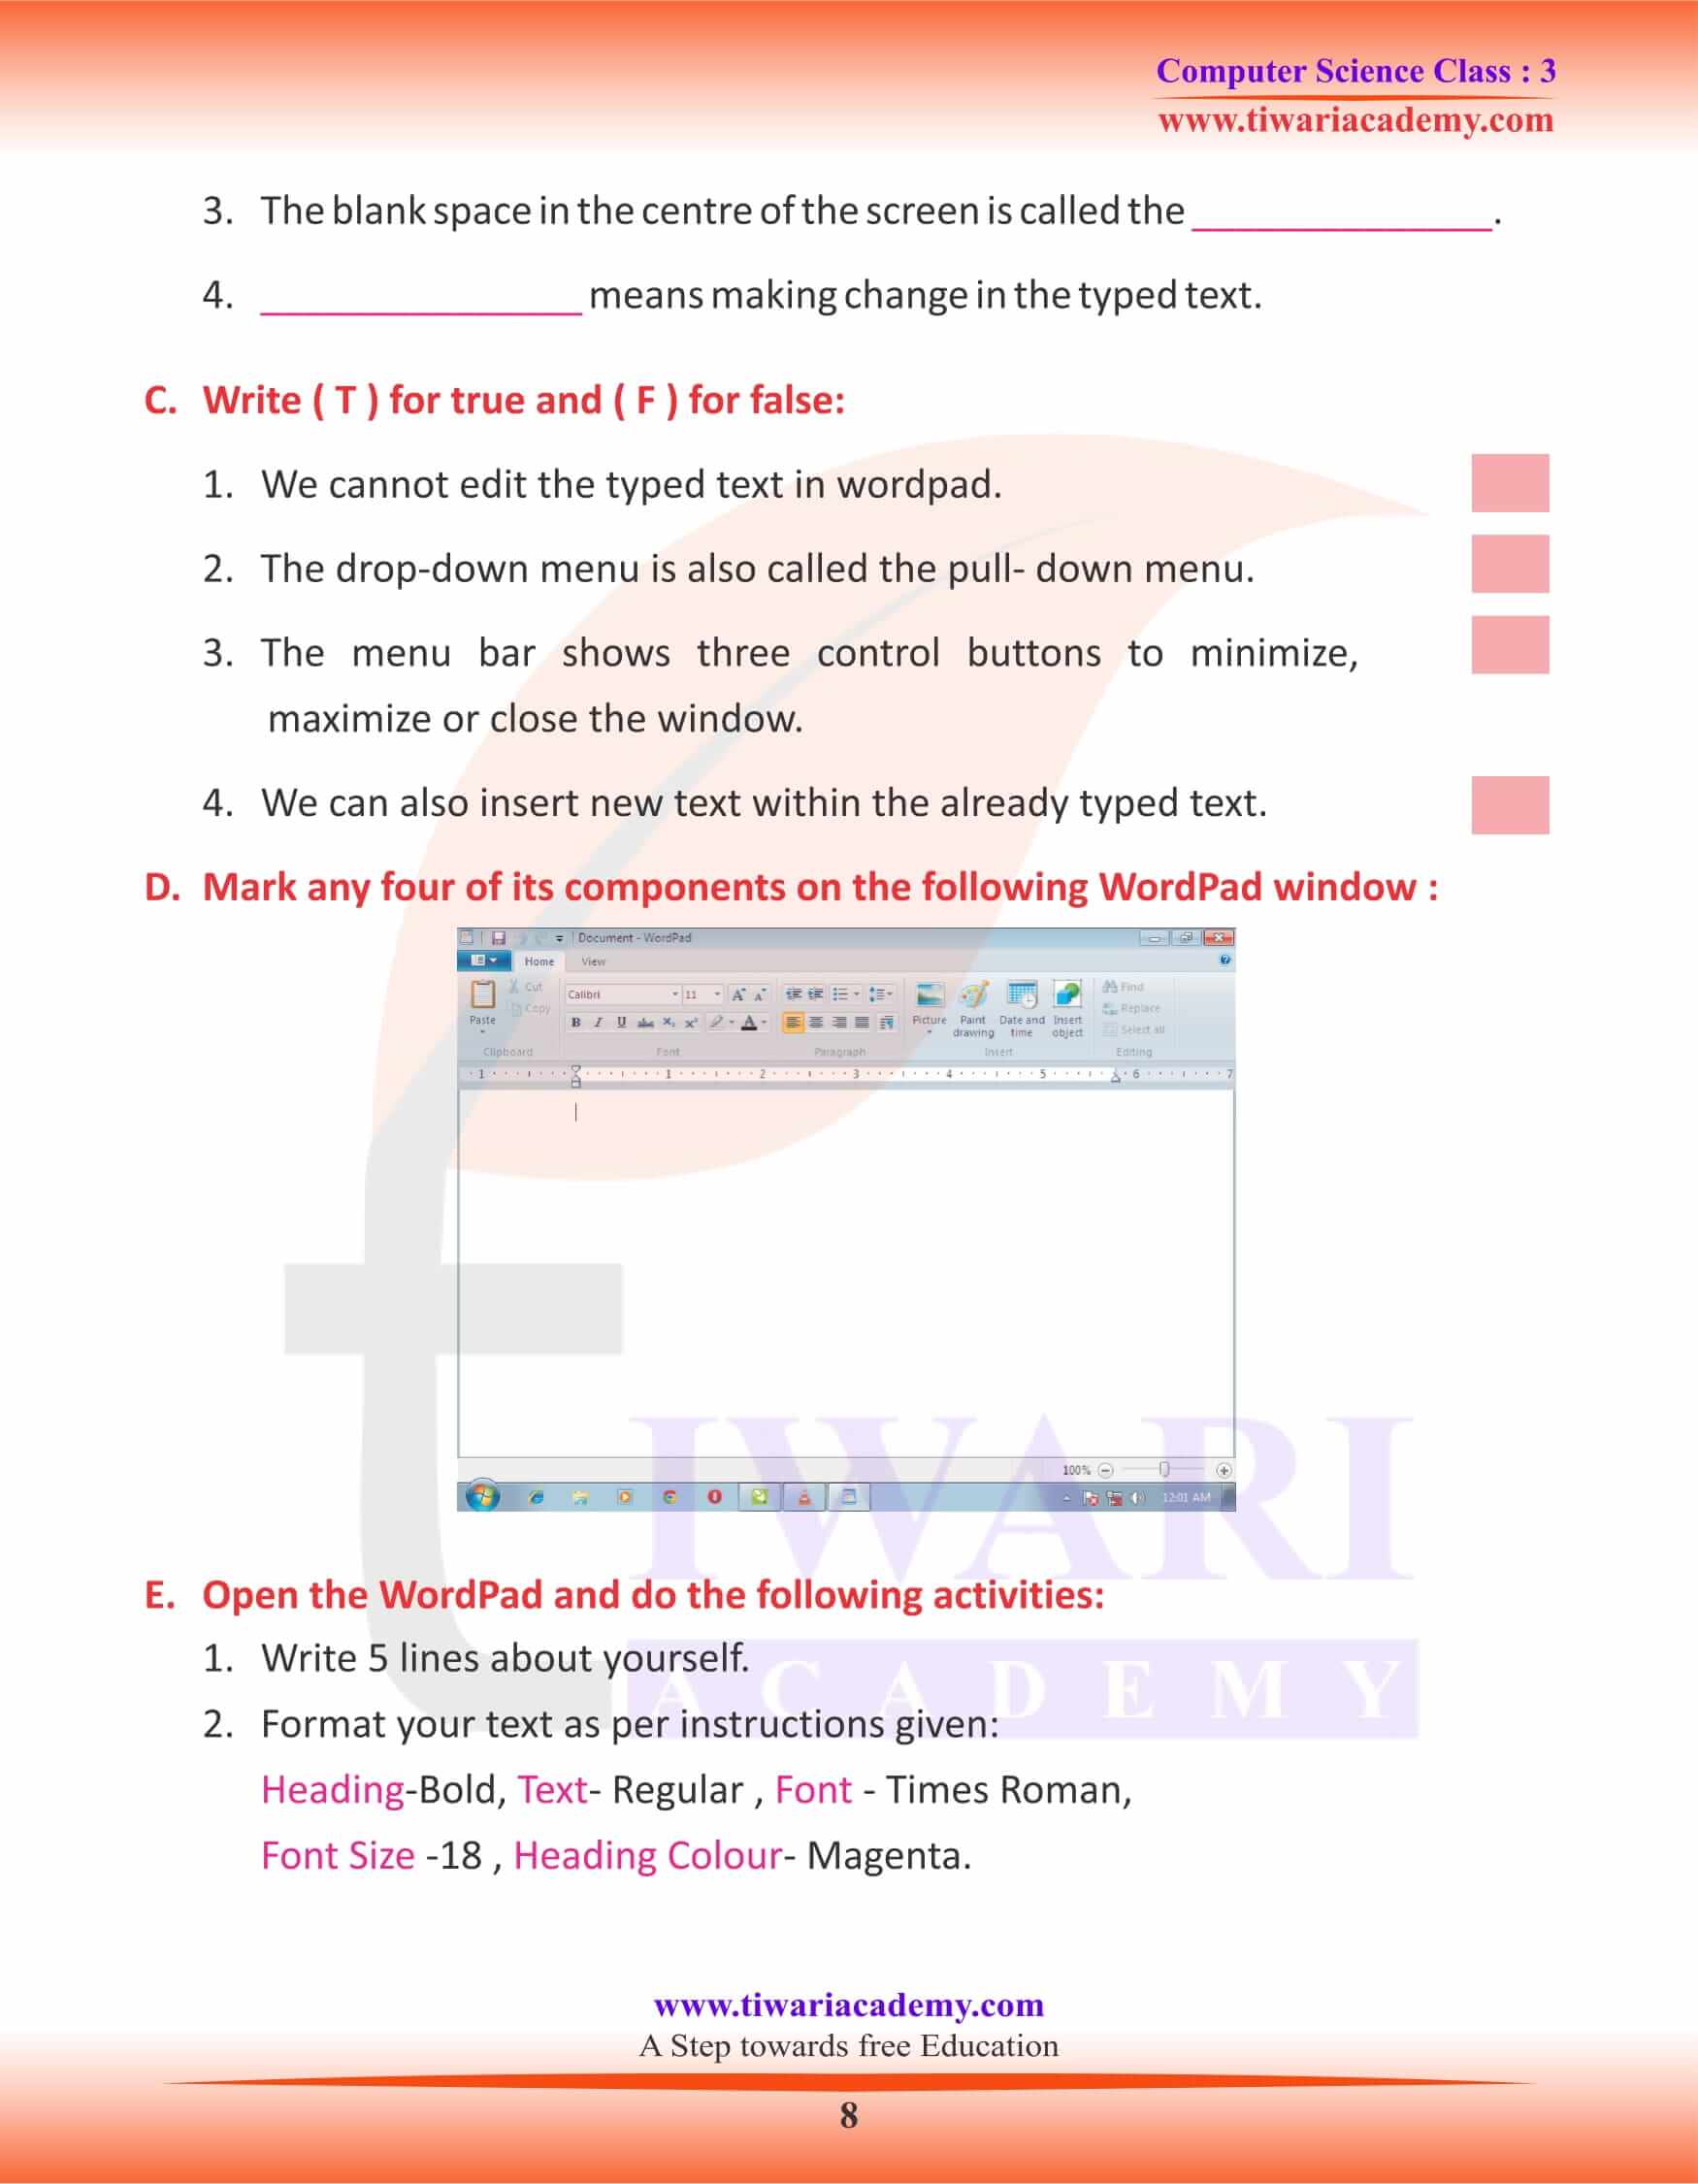 NCERT Solutions for Class 3 Computer Science Chapter 6 Worksheets